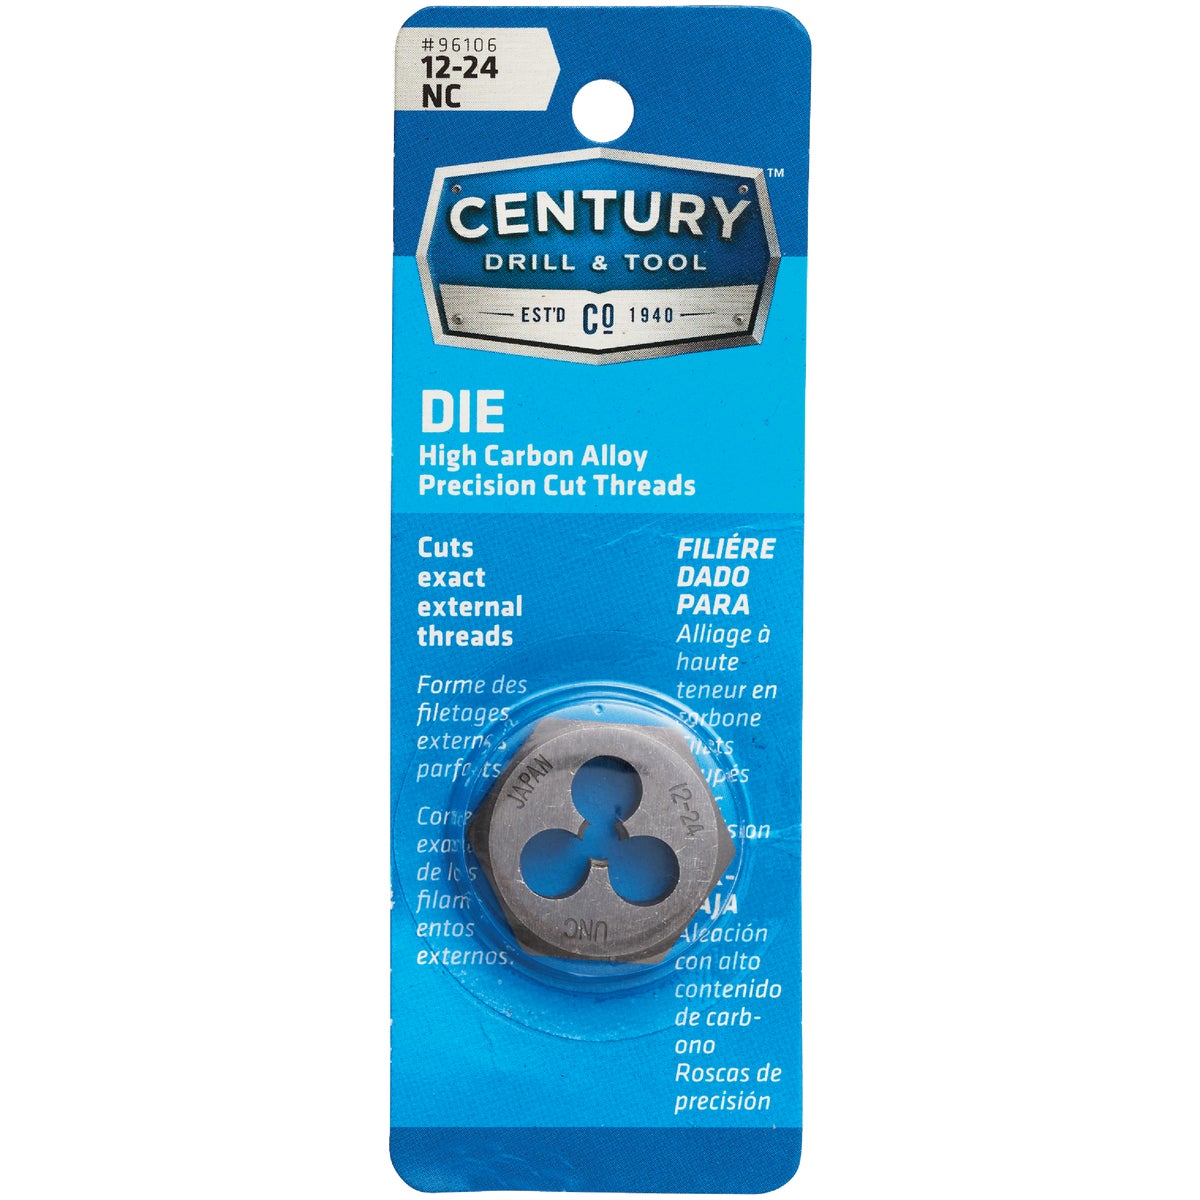 Century Drill & Tool 12-24 National Coarse 1 In. Across Flats Fractional Hexagon Die